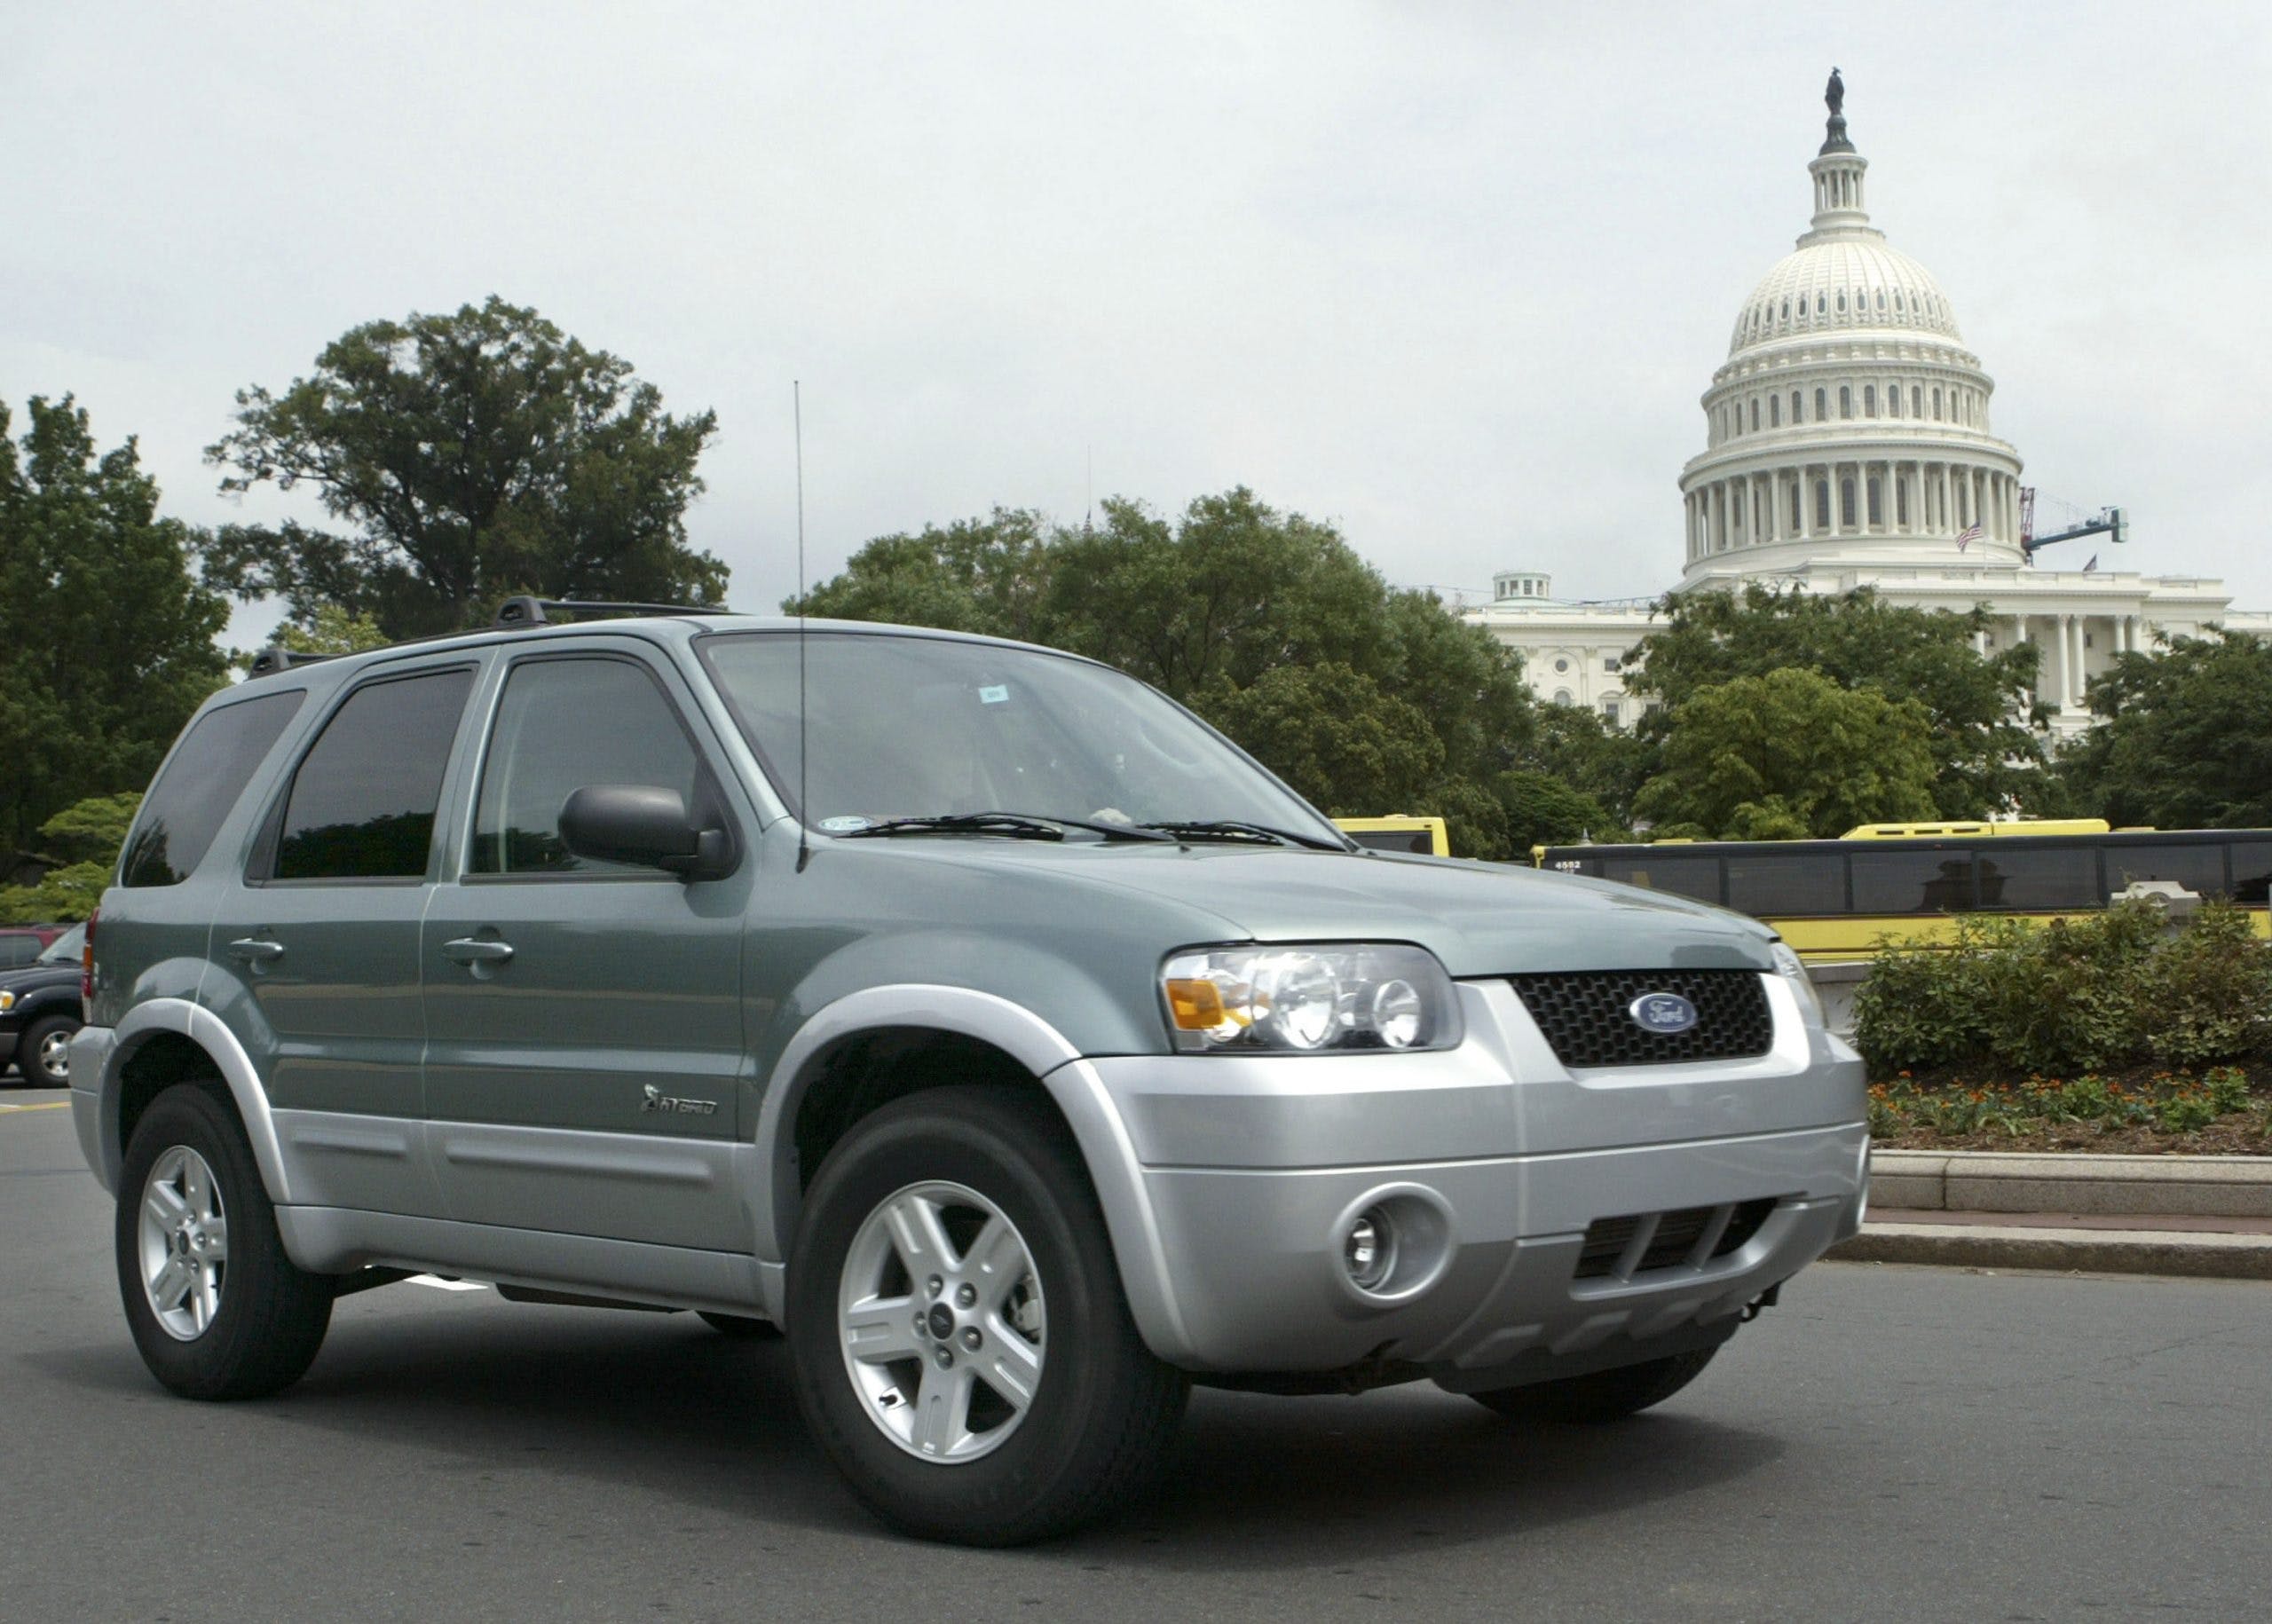 Ford's Escape Hybrid was briefly every politician's favorite car - Hagerty  Media